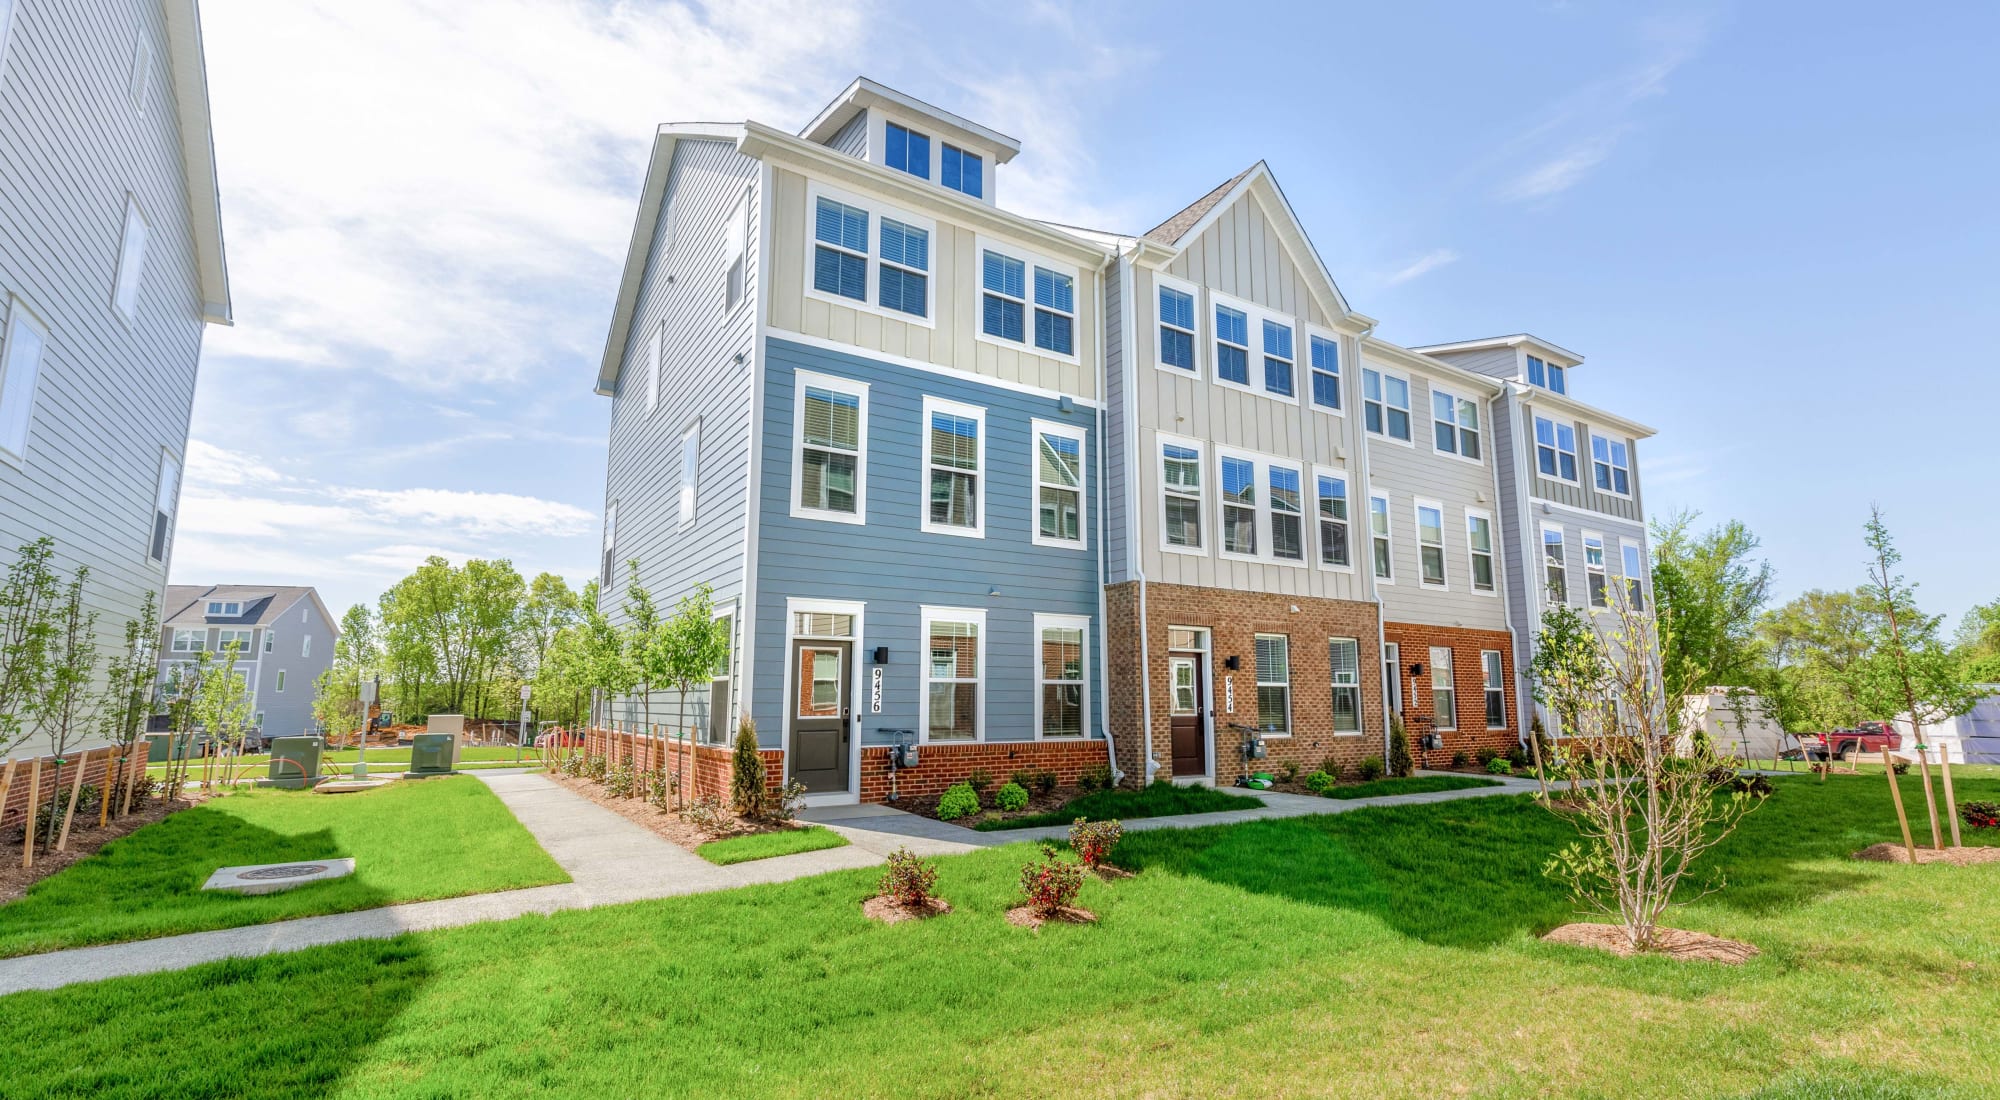 3 Bedroom Townhomes at The Collection at Scotland Heights, Waldorf, Maryland Den with entryway